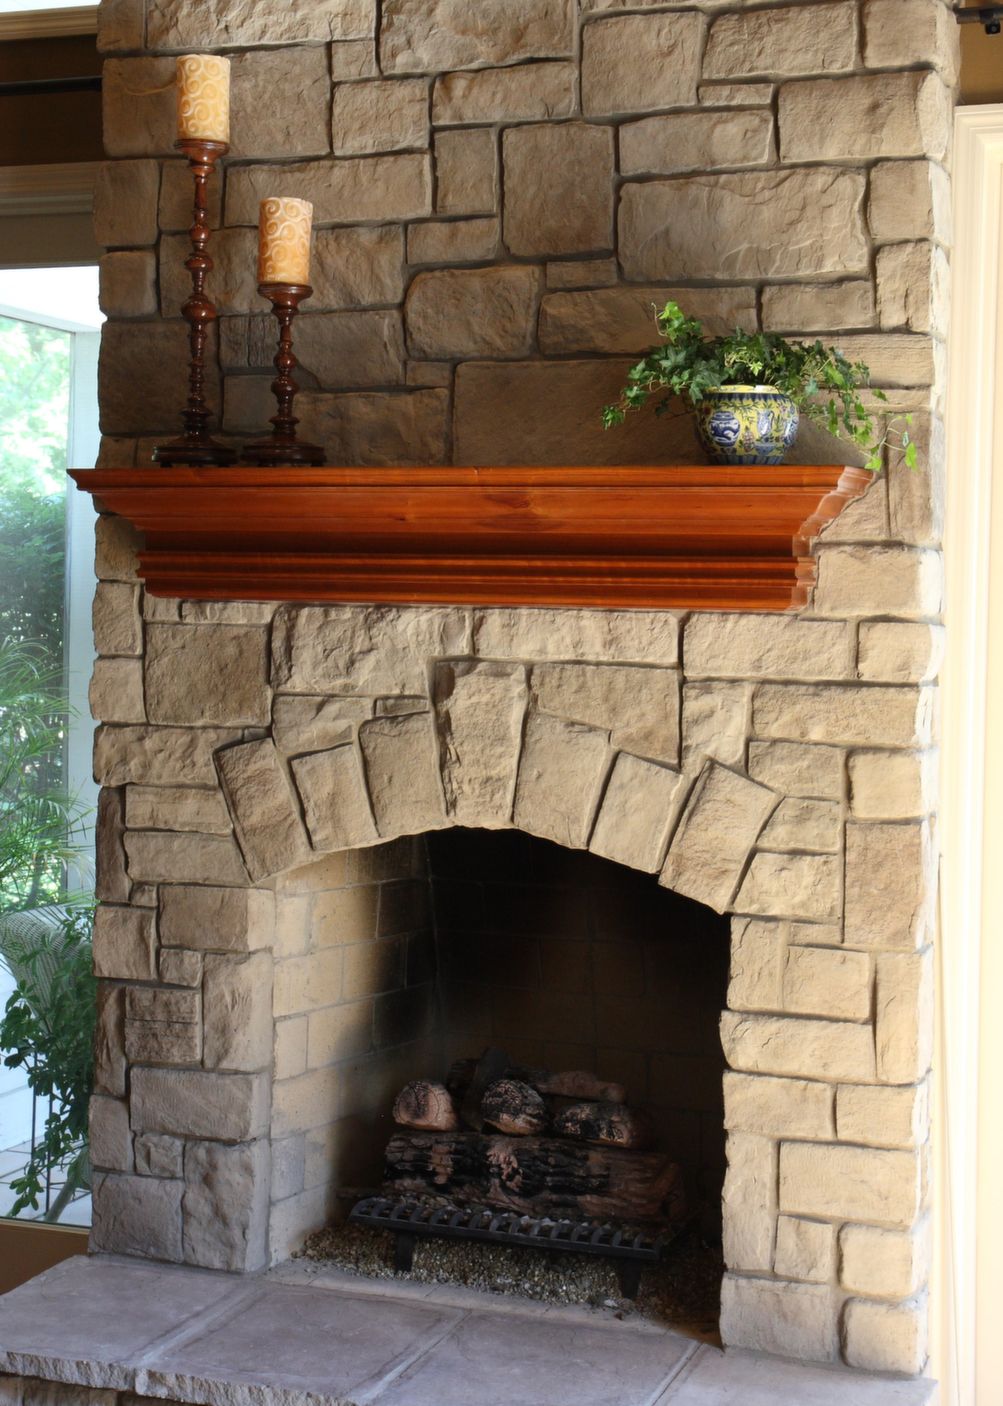 Cover Brick Fireplace with Stone Lovely Stone for Fireplace Fireplace Veneer Stone